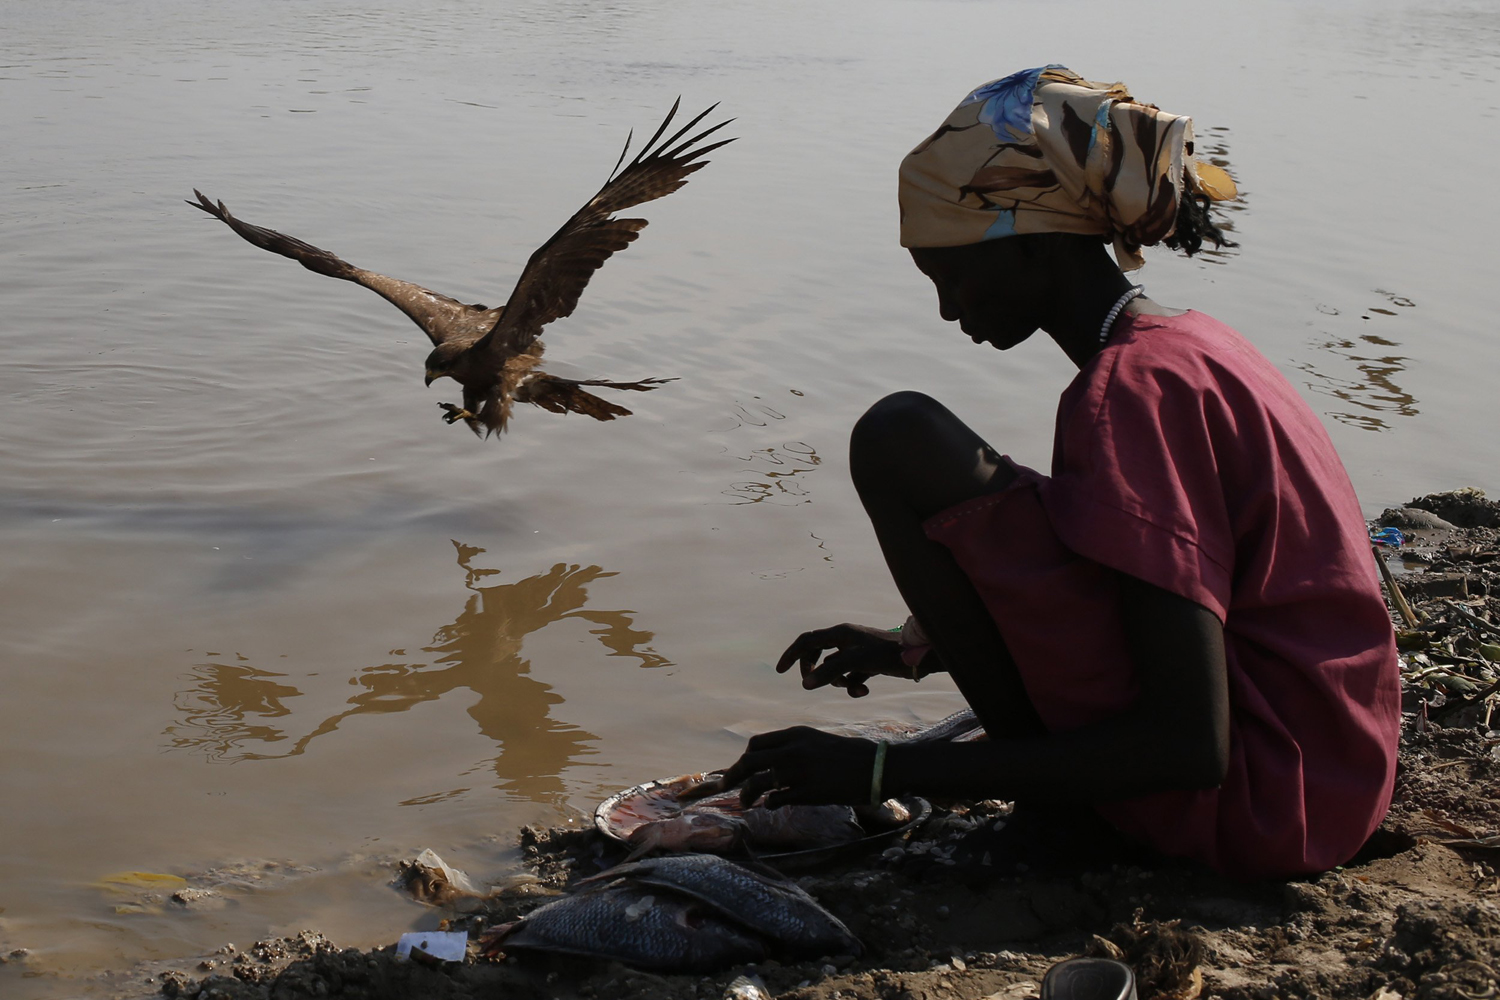 Feb. 10, 2014. A falcon scavenges for scraps as a woman cleans fish at the banks of Sobat river in Upper Nile State, South Sudan.